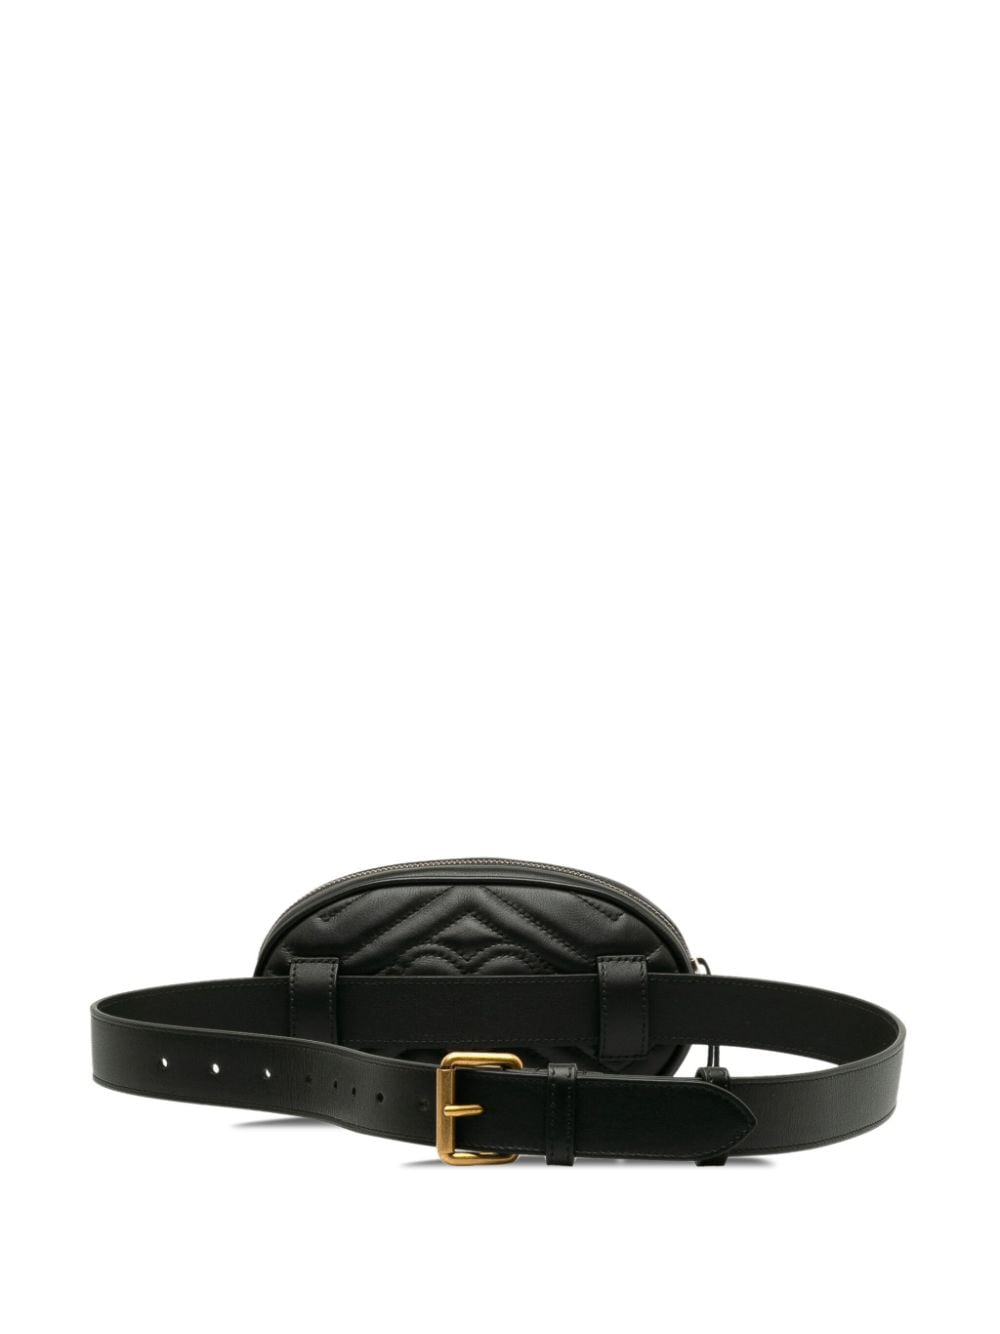 Pre-owned Gucci 2000-2015 Gg Marmont Belt Bag In Black